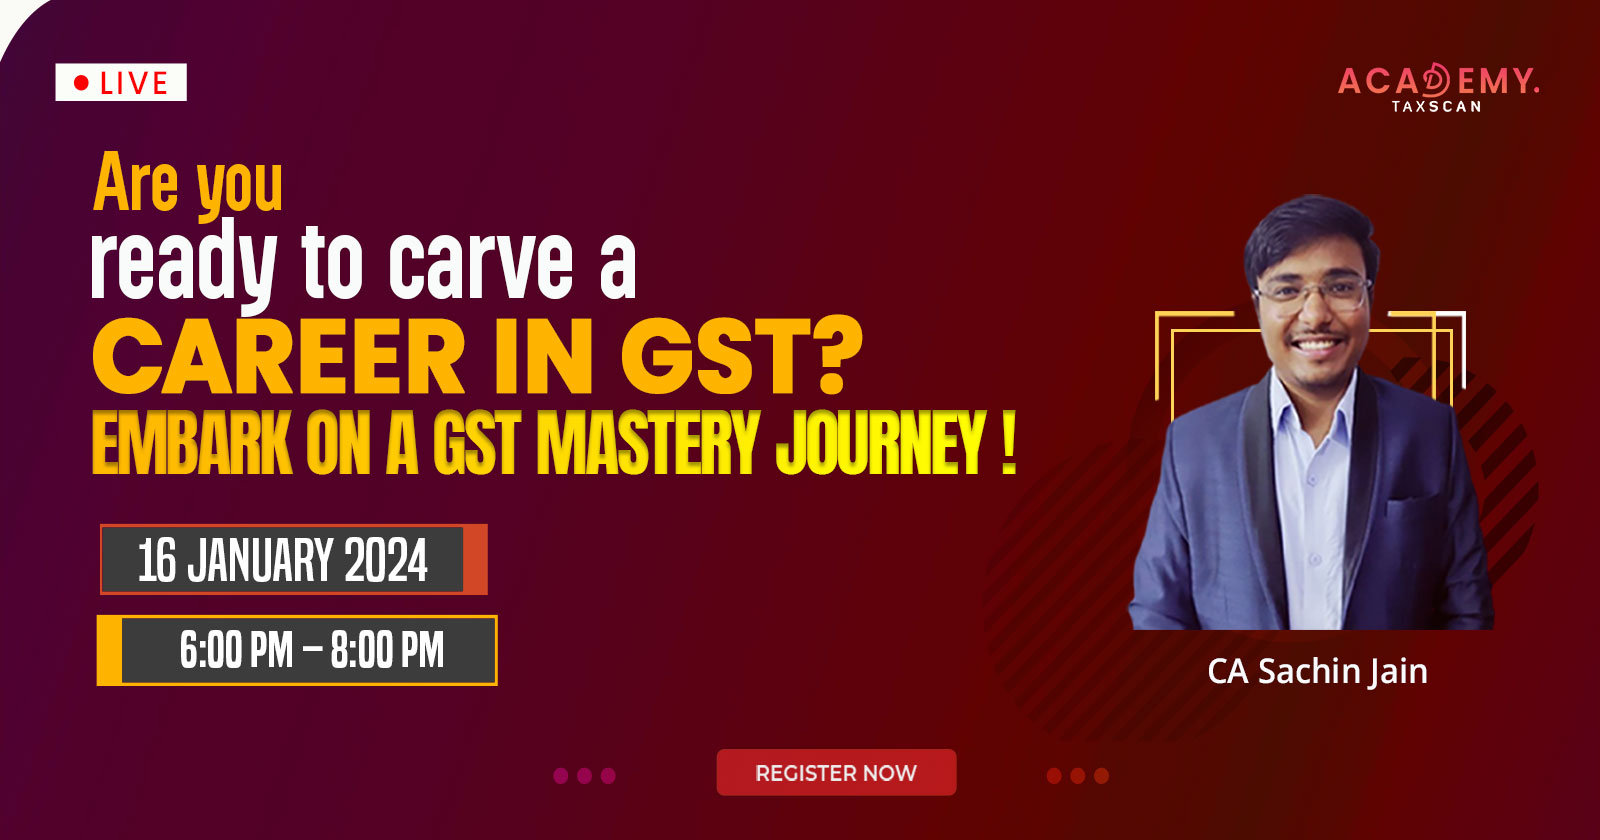 carve a career in GST - GST - career - carve a career - Embark on a GST Mastery Journey -GST Mastery Journey - GST Mastery - Certification Course - best online certificate course -Top online - courses -Top online Certificate courses - Taxscan Academy